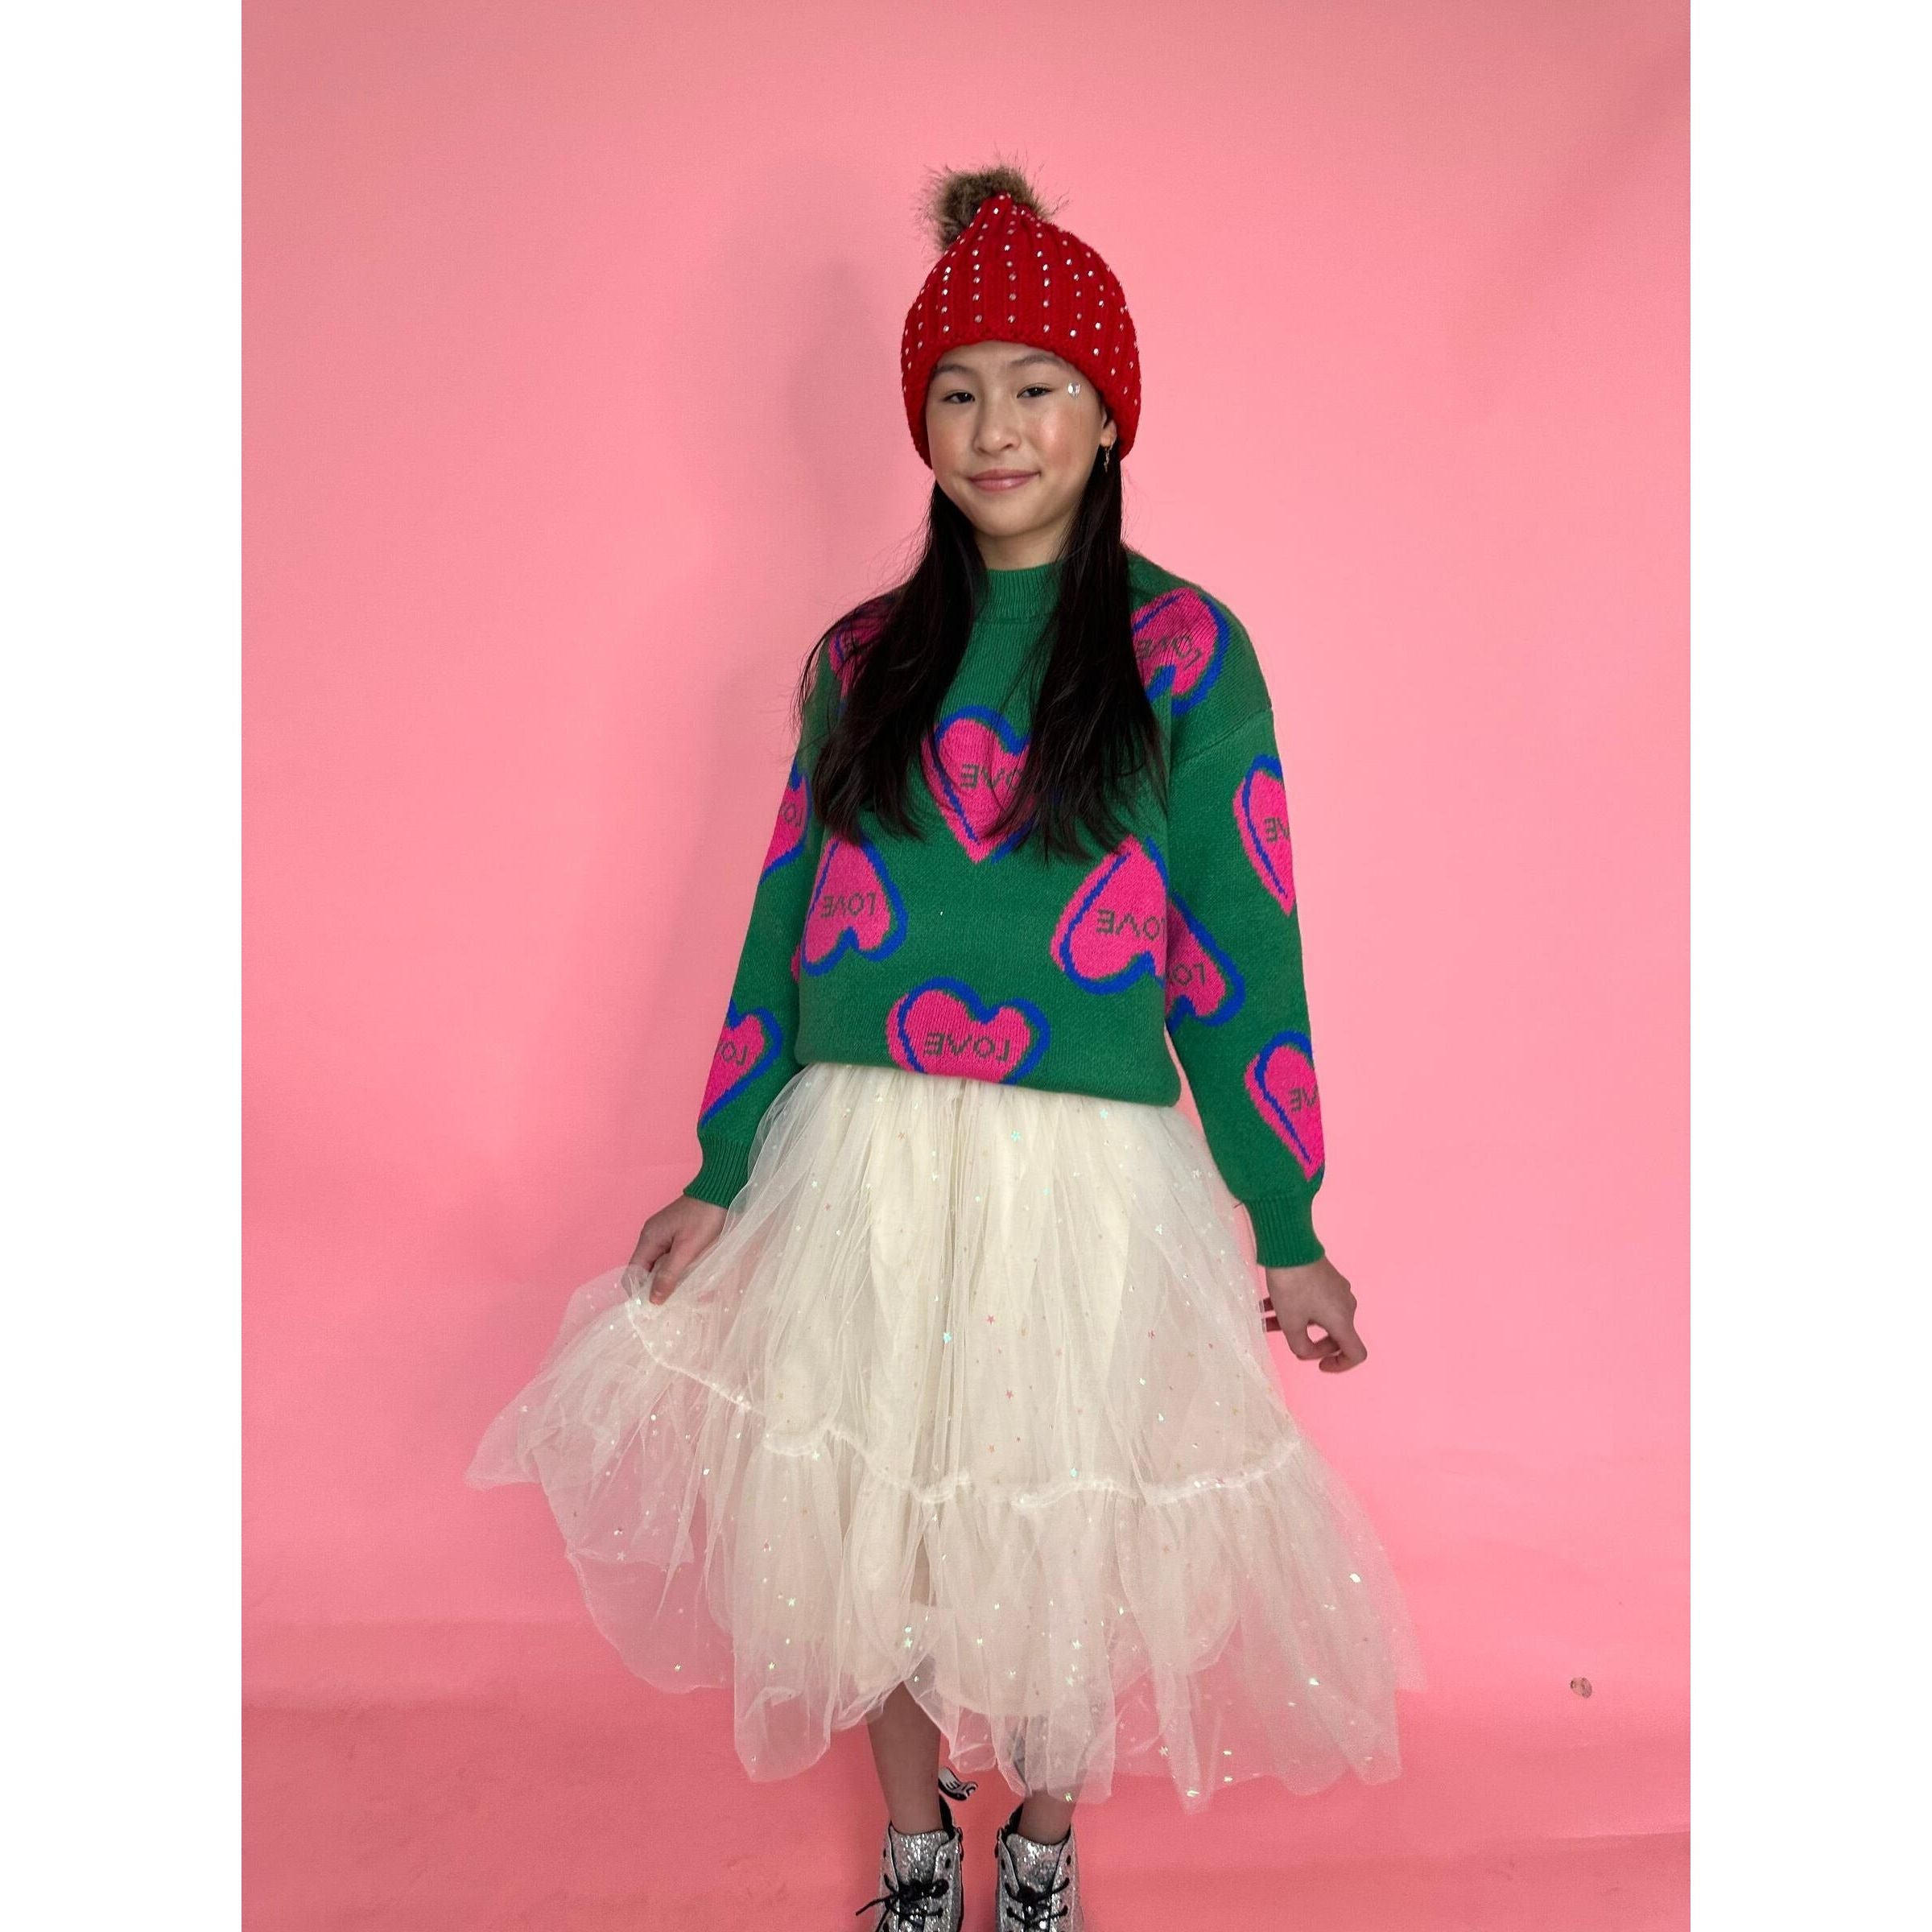 girl wearing green long sleeve sweater with knit pink and blue hearts with "love" printed inside